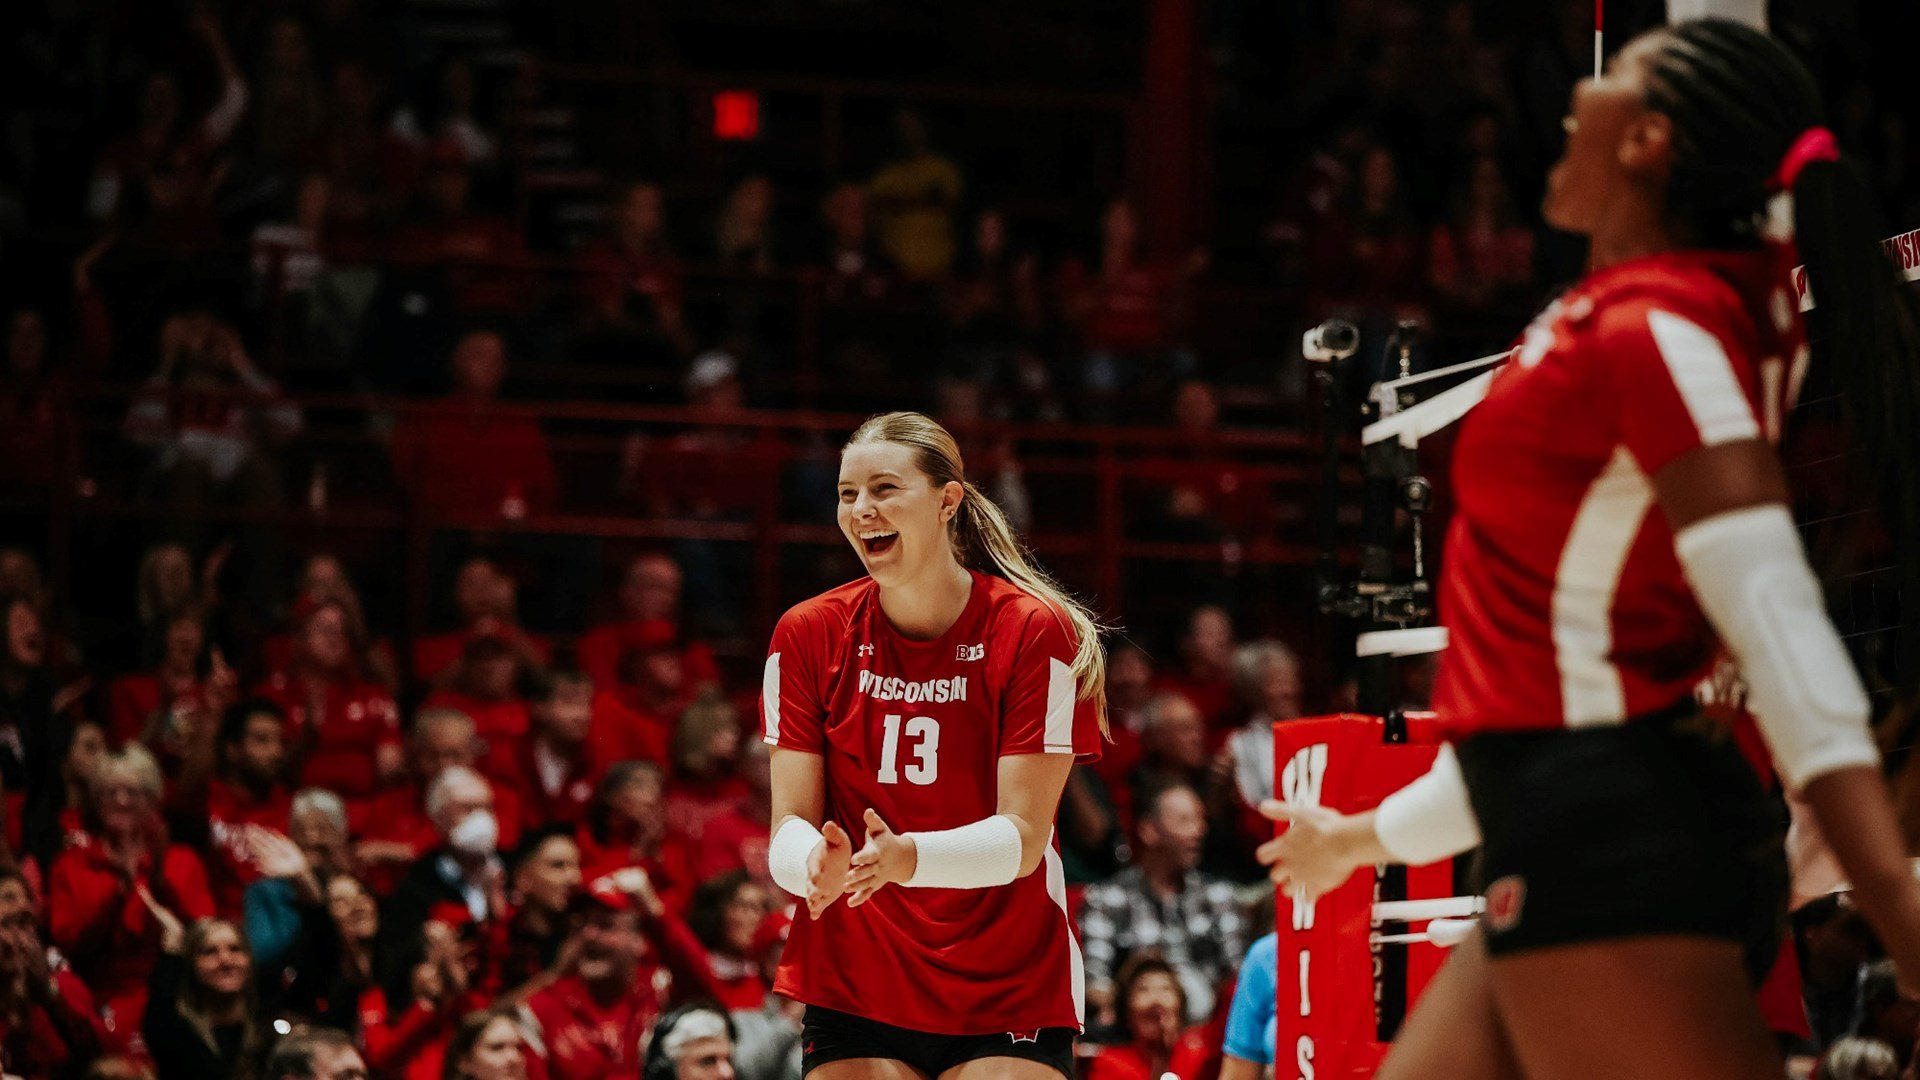 AVCA NCAA Division I Player of the Year